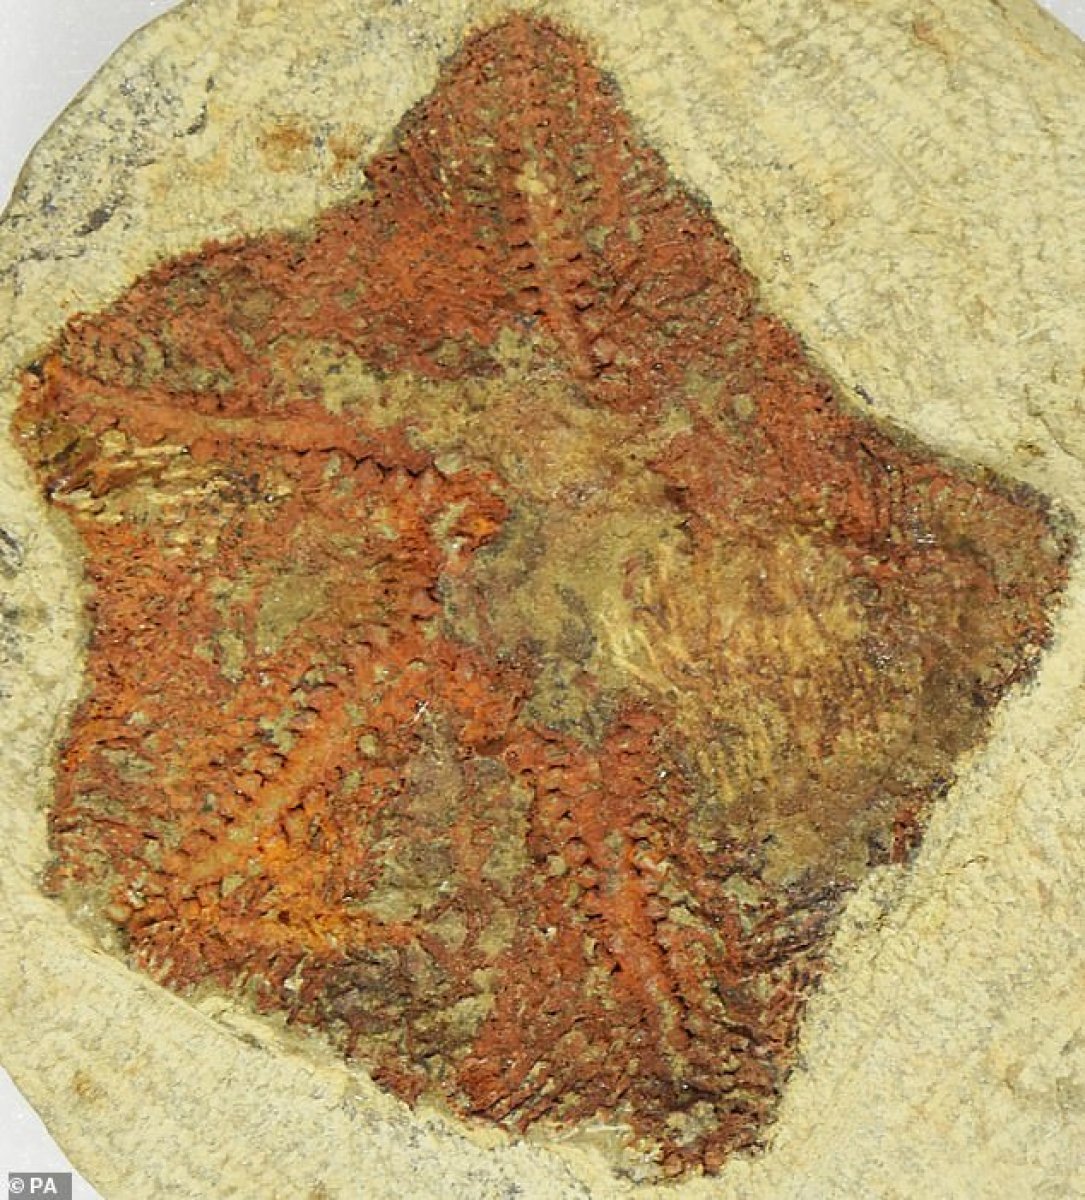 480-million-year-old starfish fossil found in Morocco #2